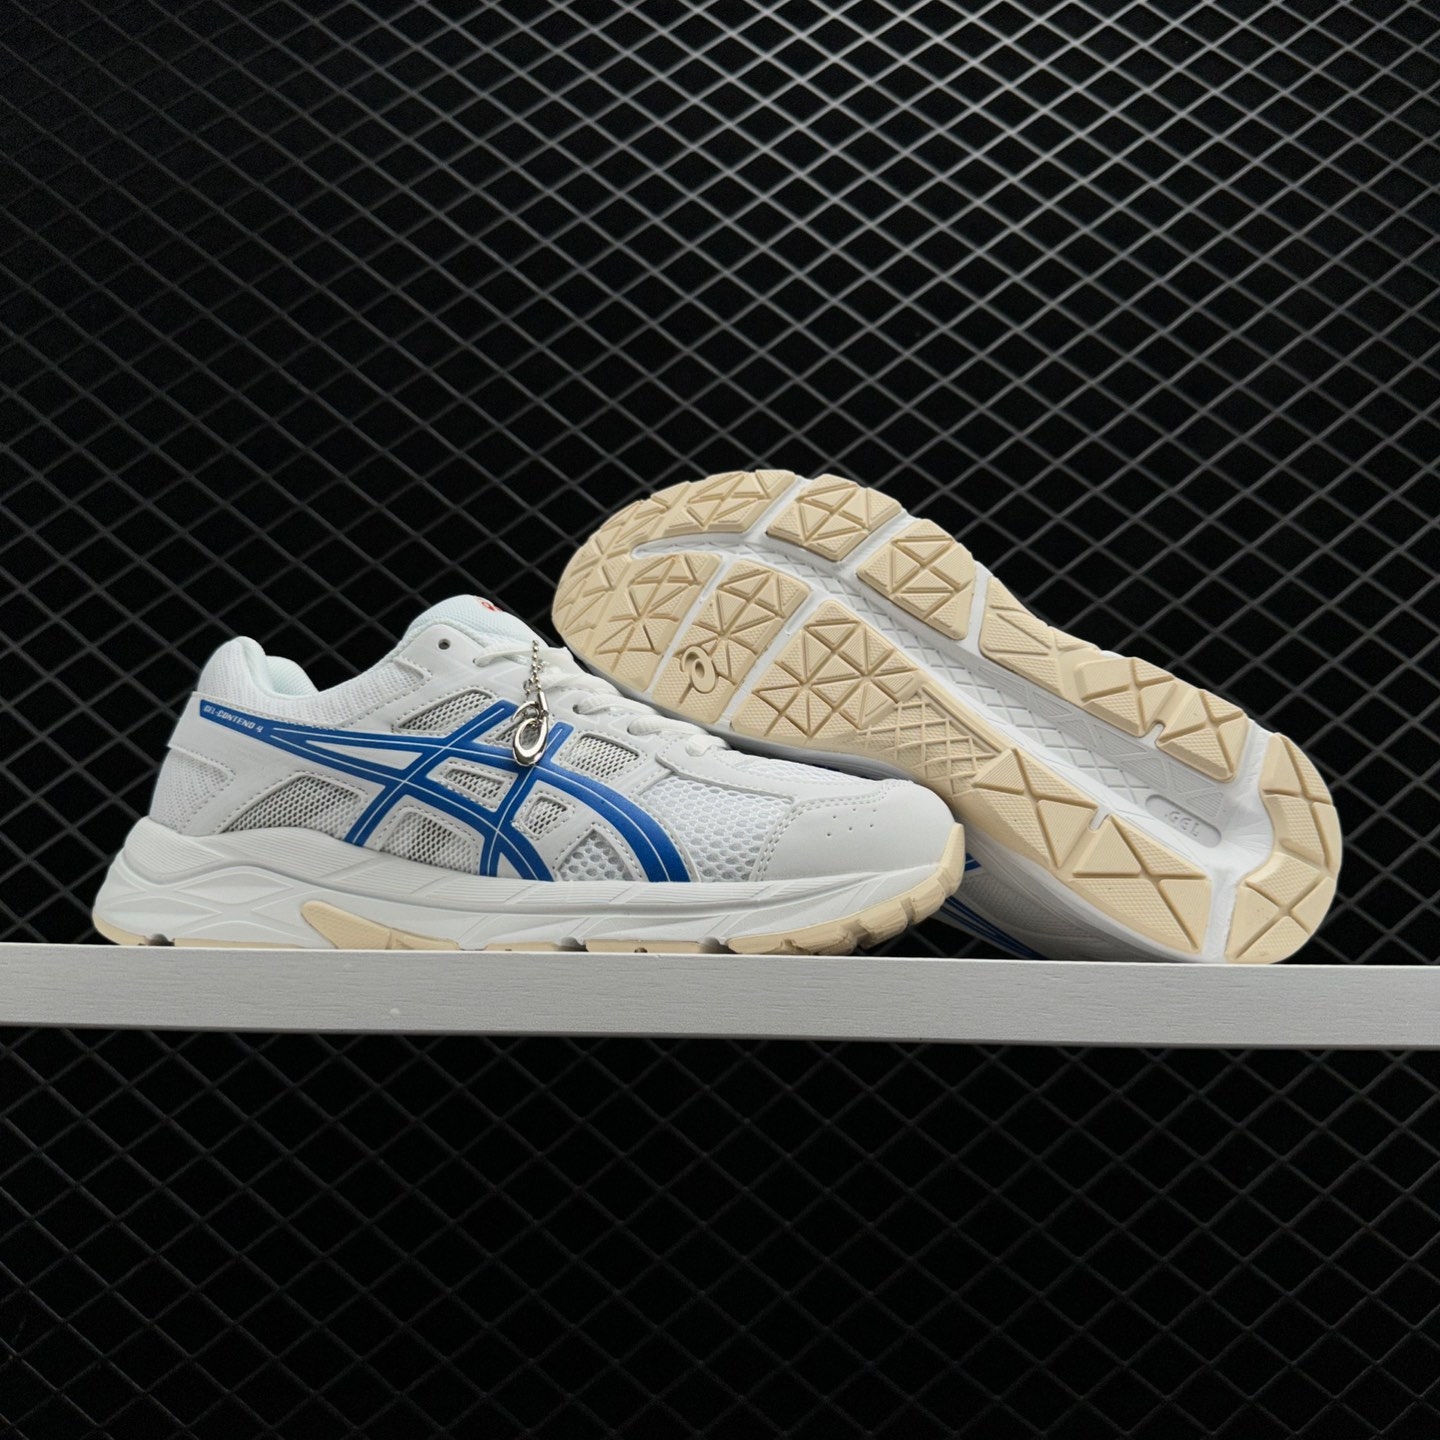 Asics Gel-Contend 4 White Blue Yellow - Superior Comfort & Style